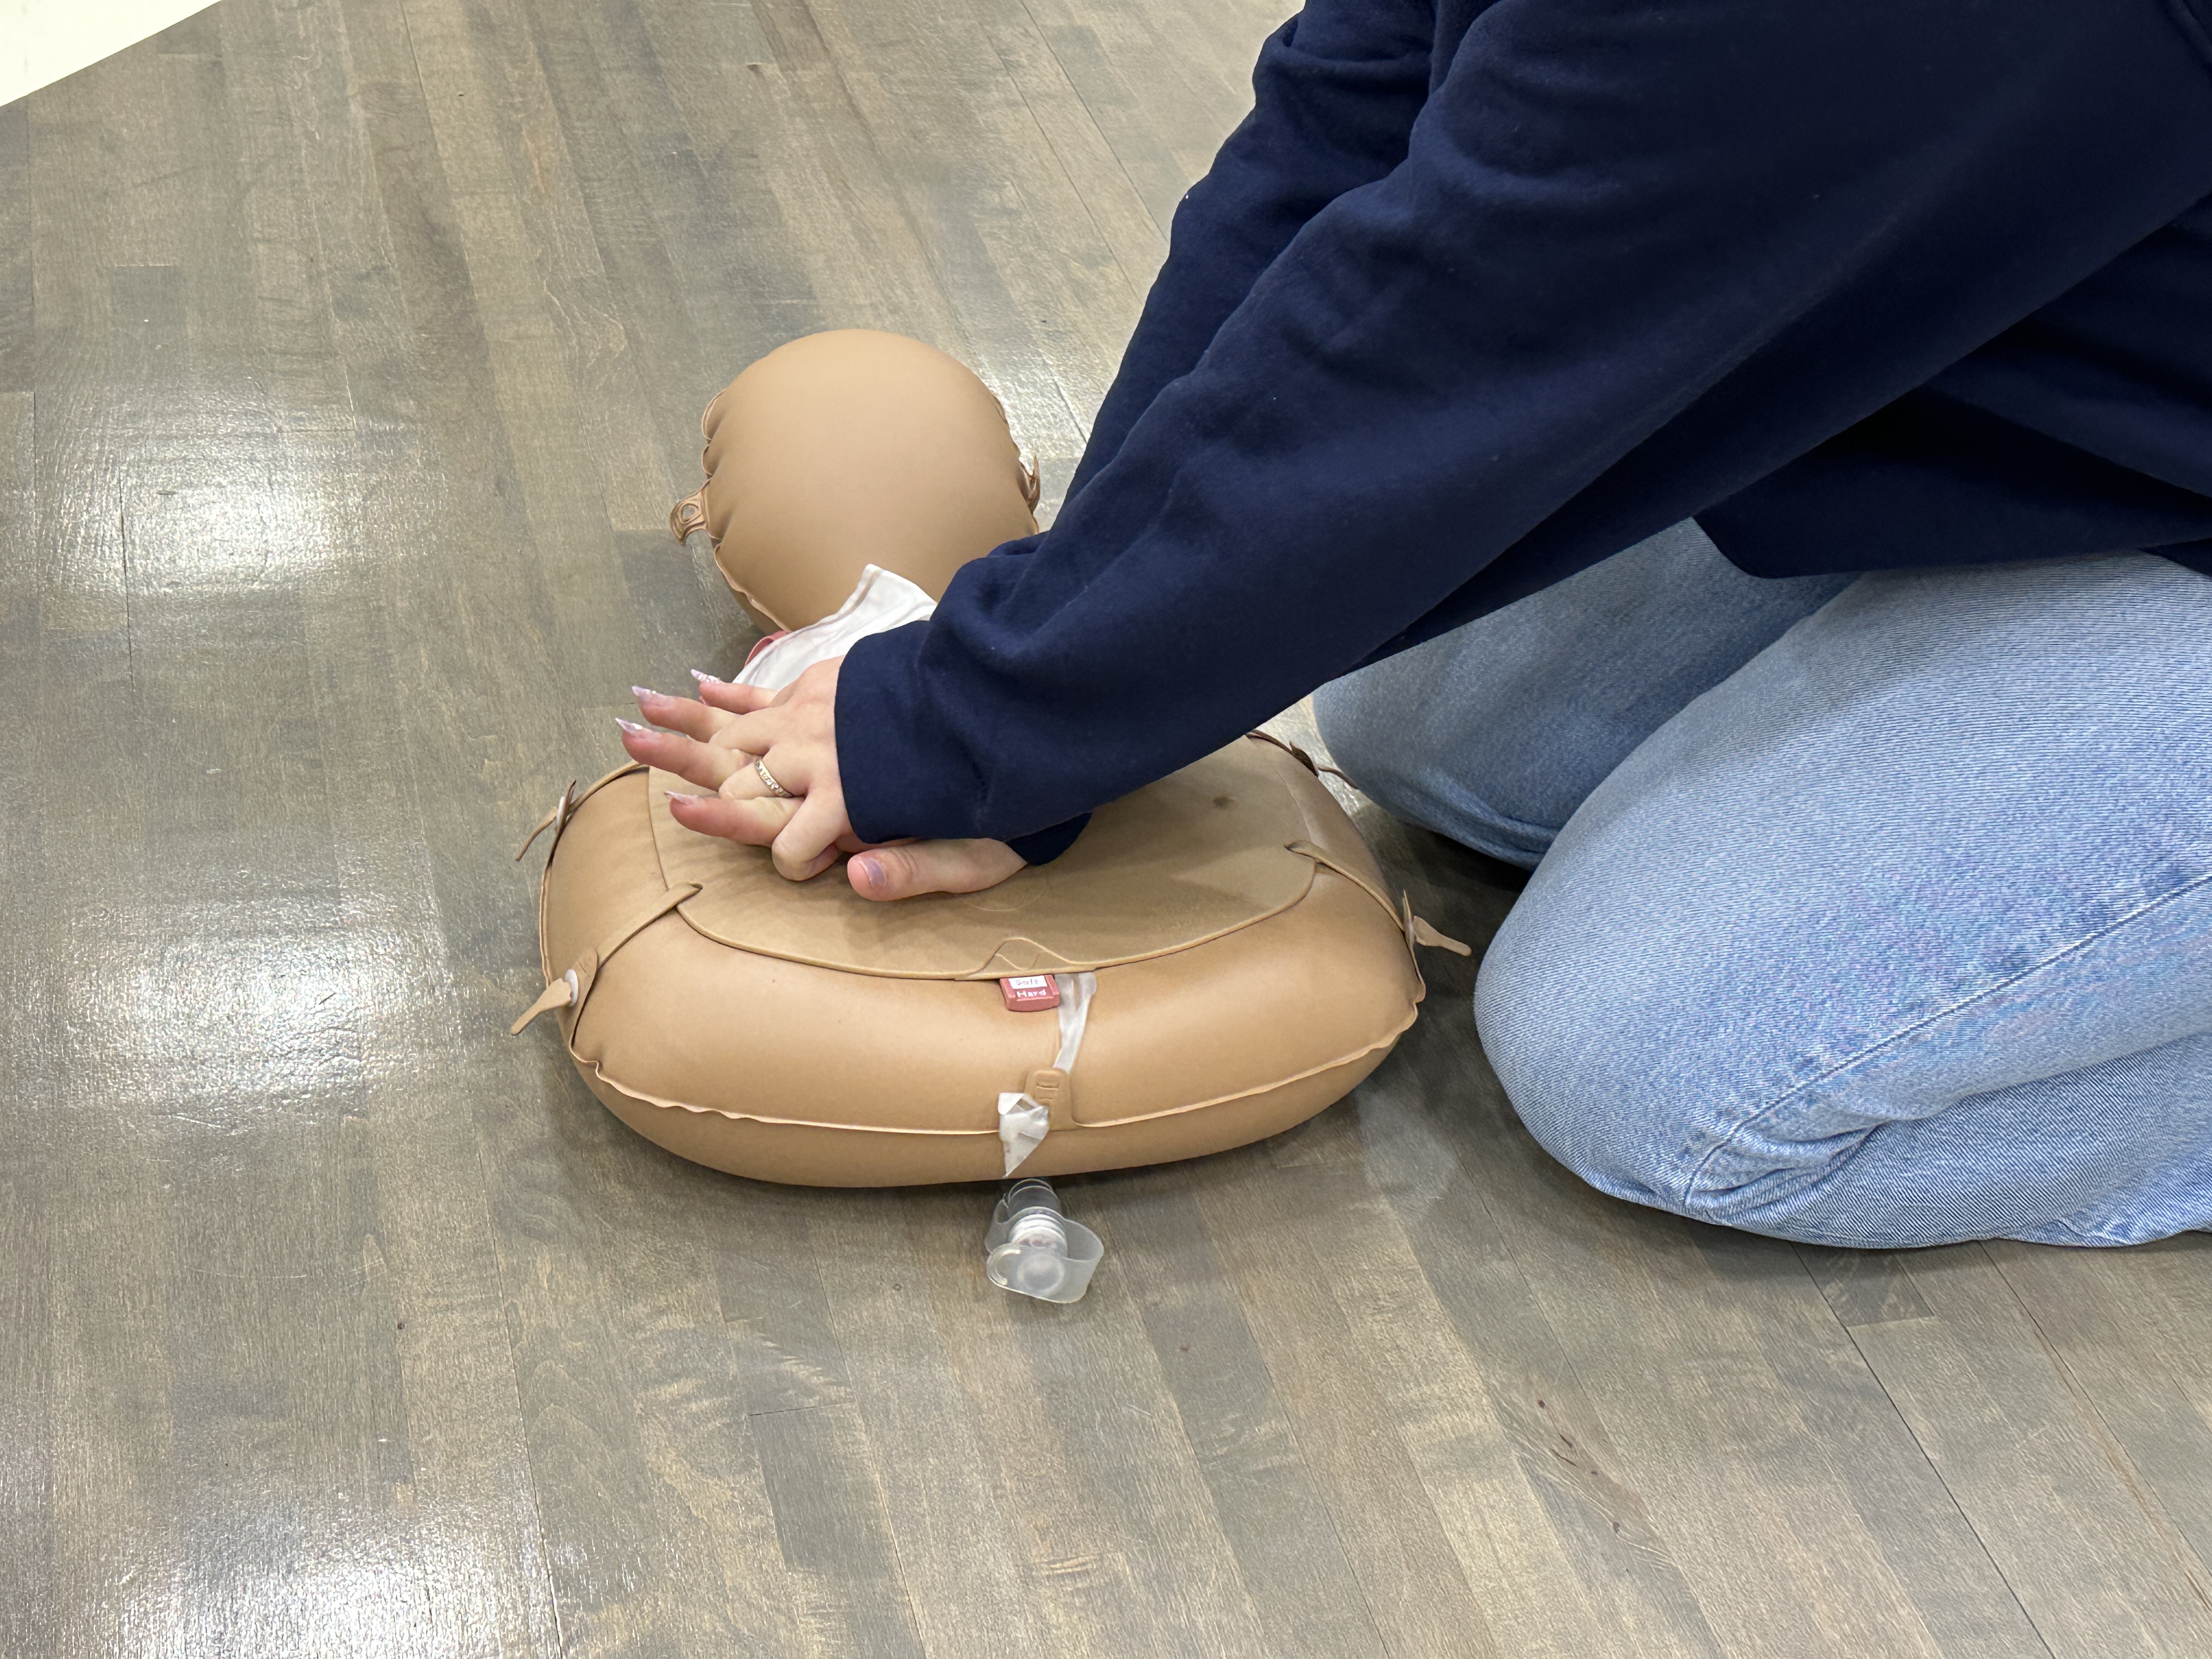 Student practices CPR on practice dummy.